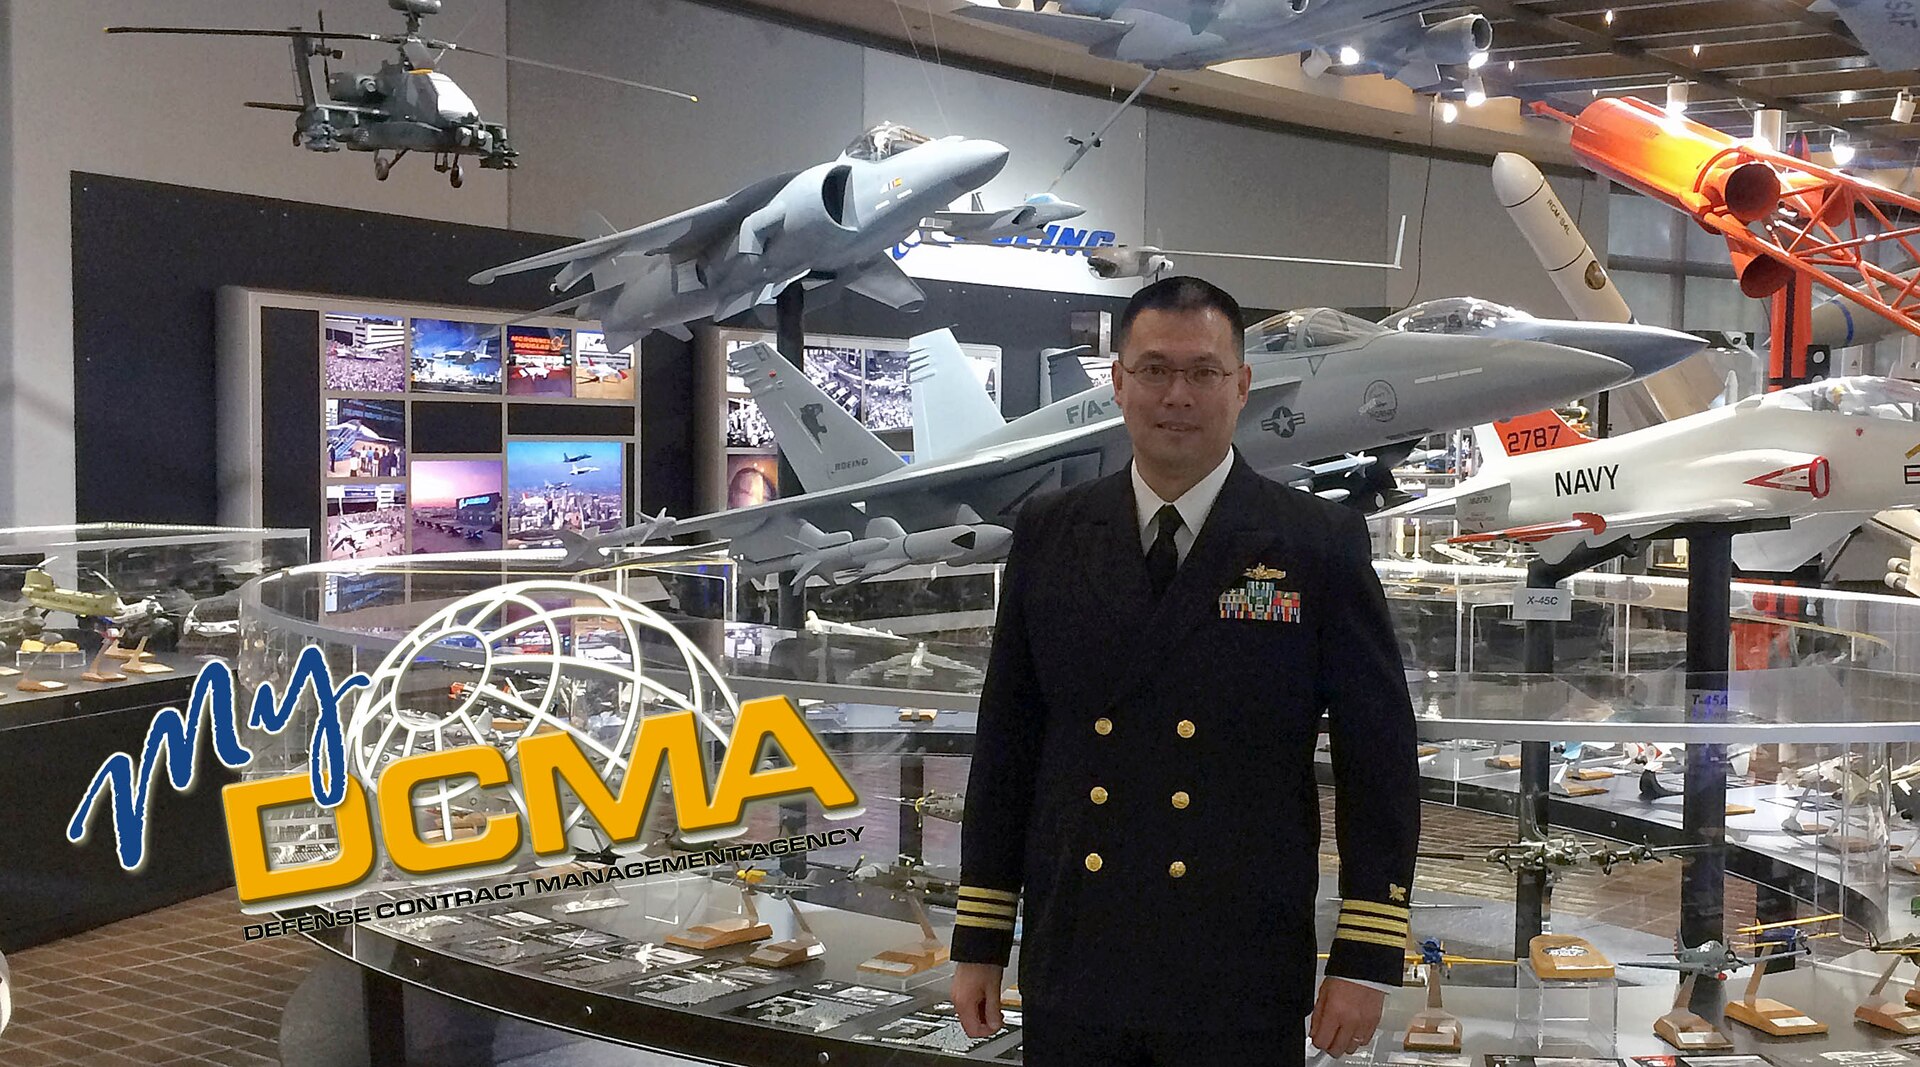 I am Cmdr. James Wong, and this is My DCMA.